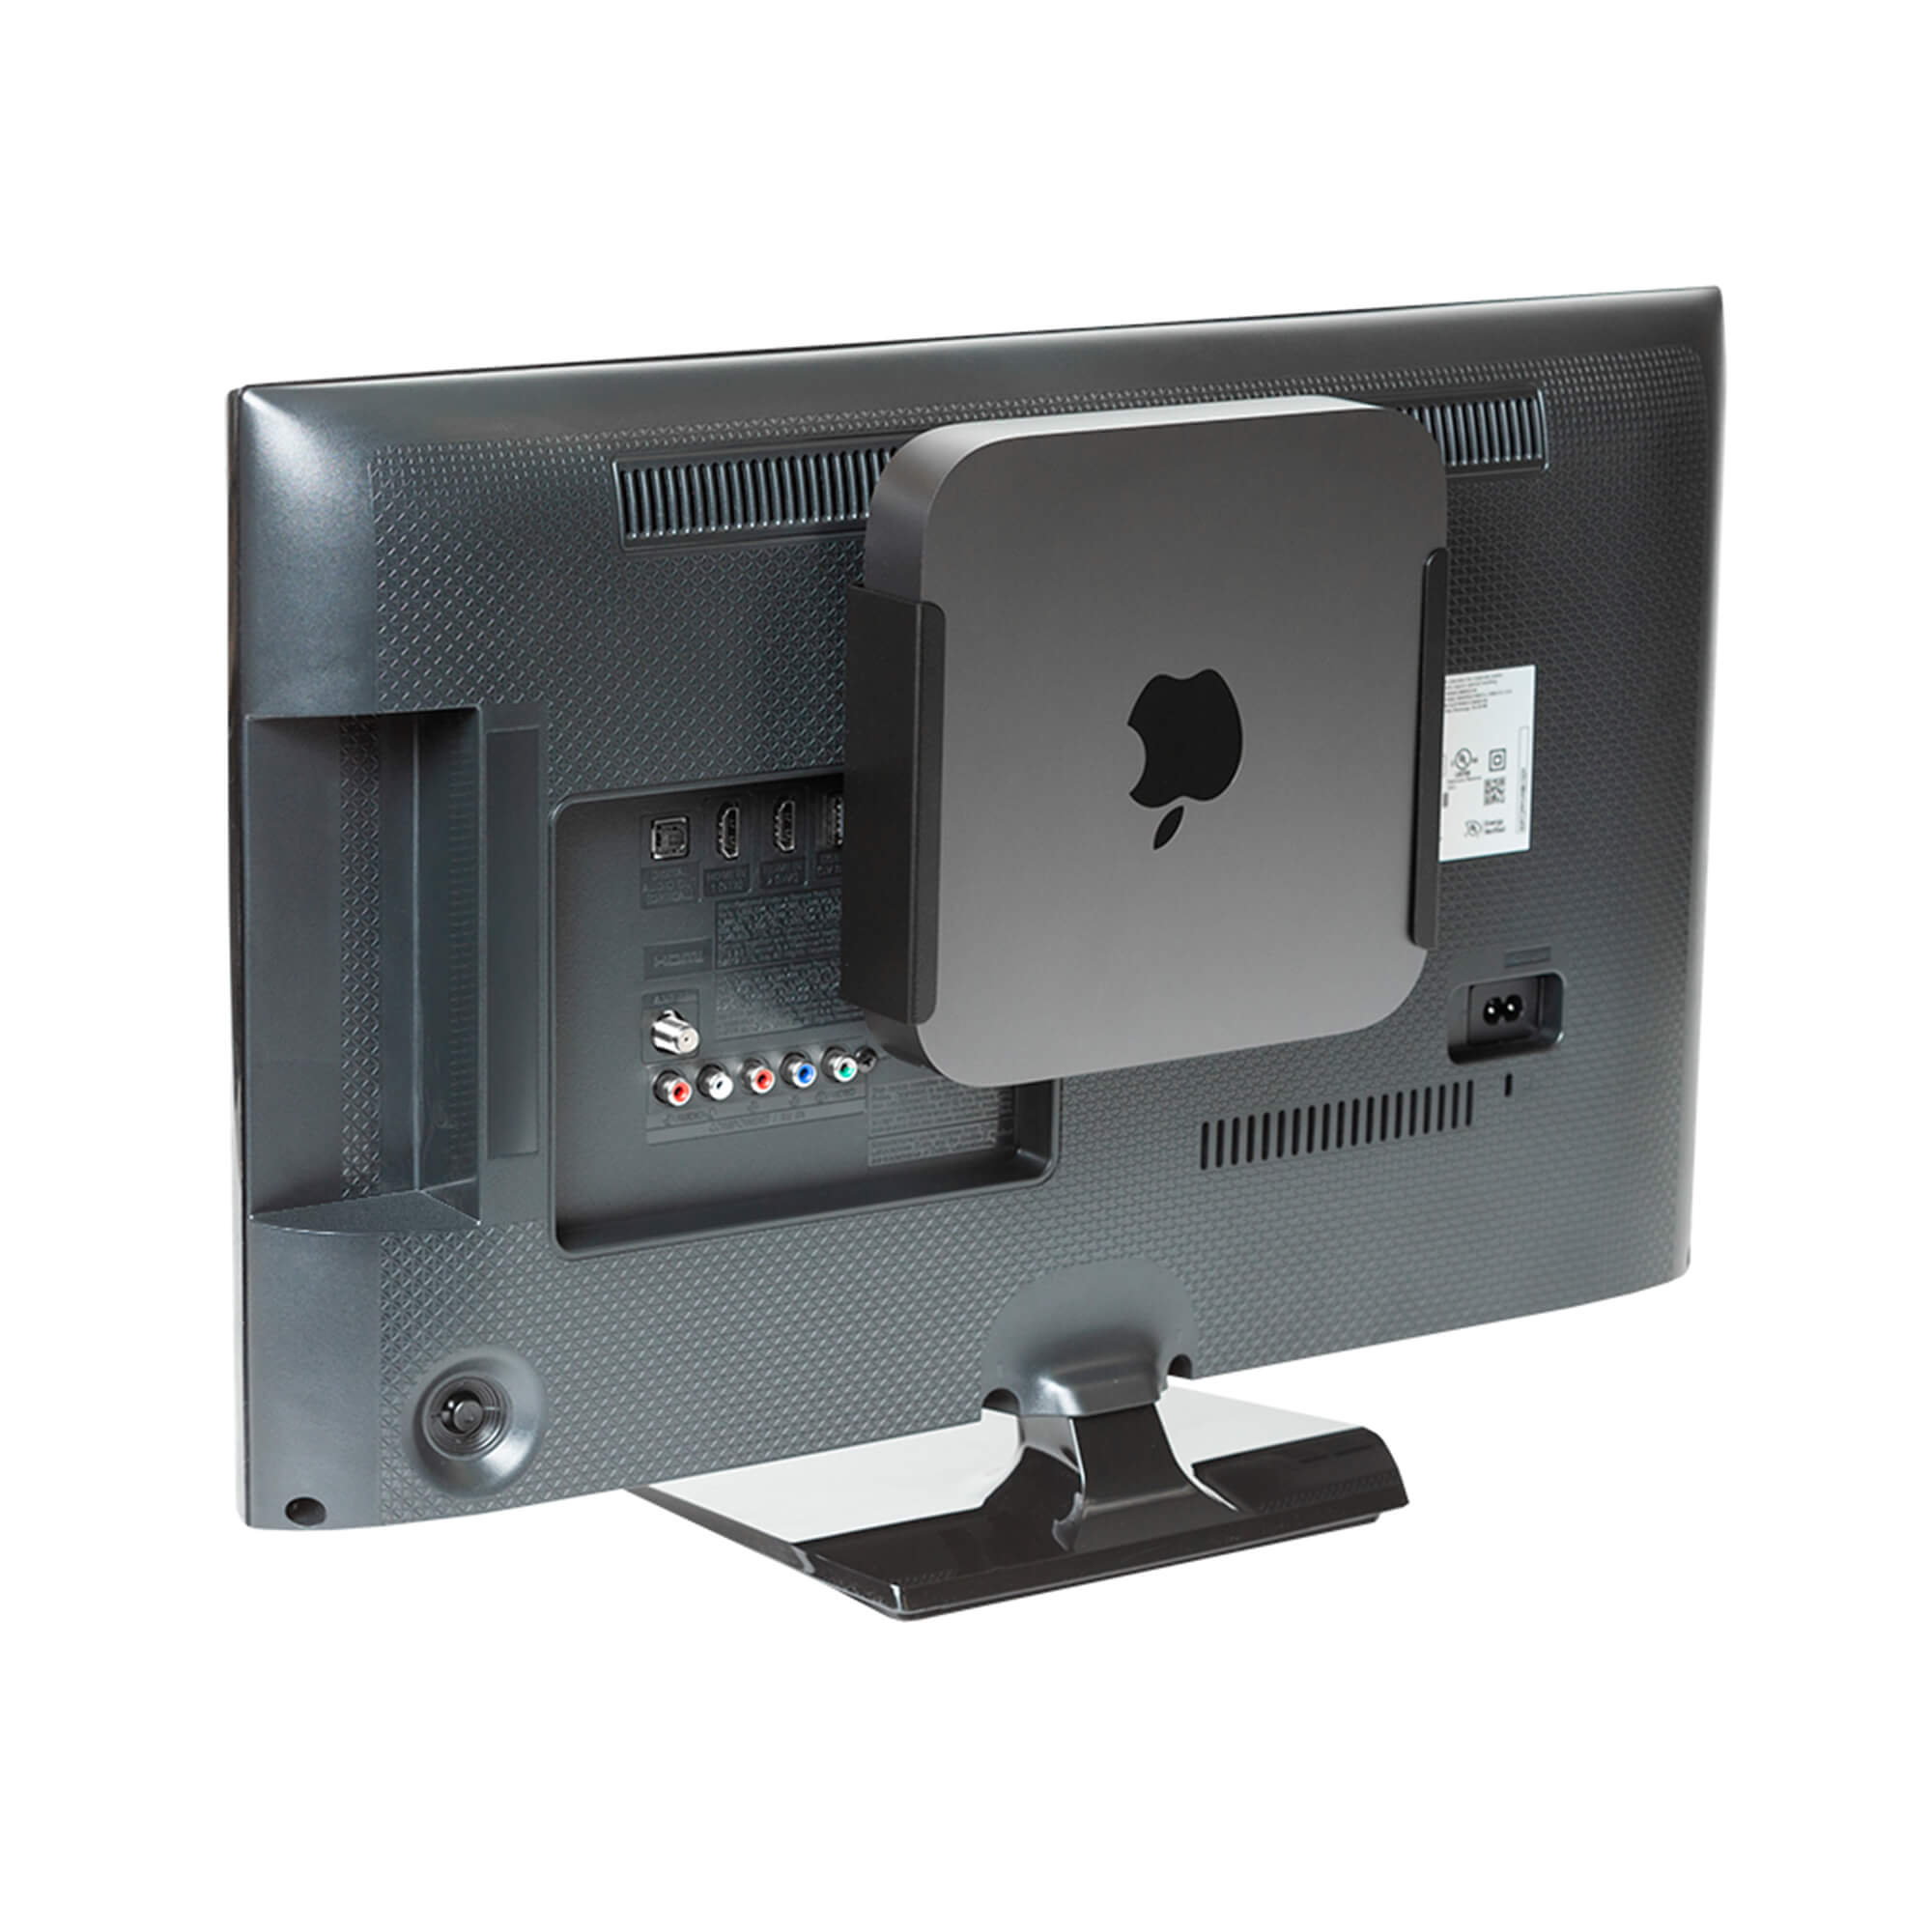 Black steel HIDEit Mount securely holding Mac mini compatible with Mac mini computers released after 2010 to current M2.